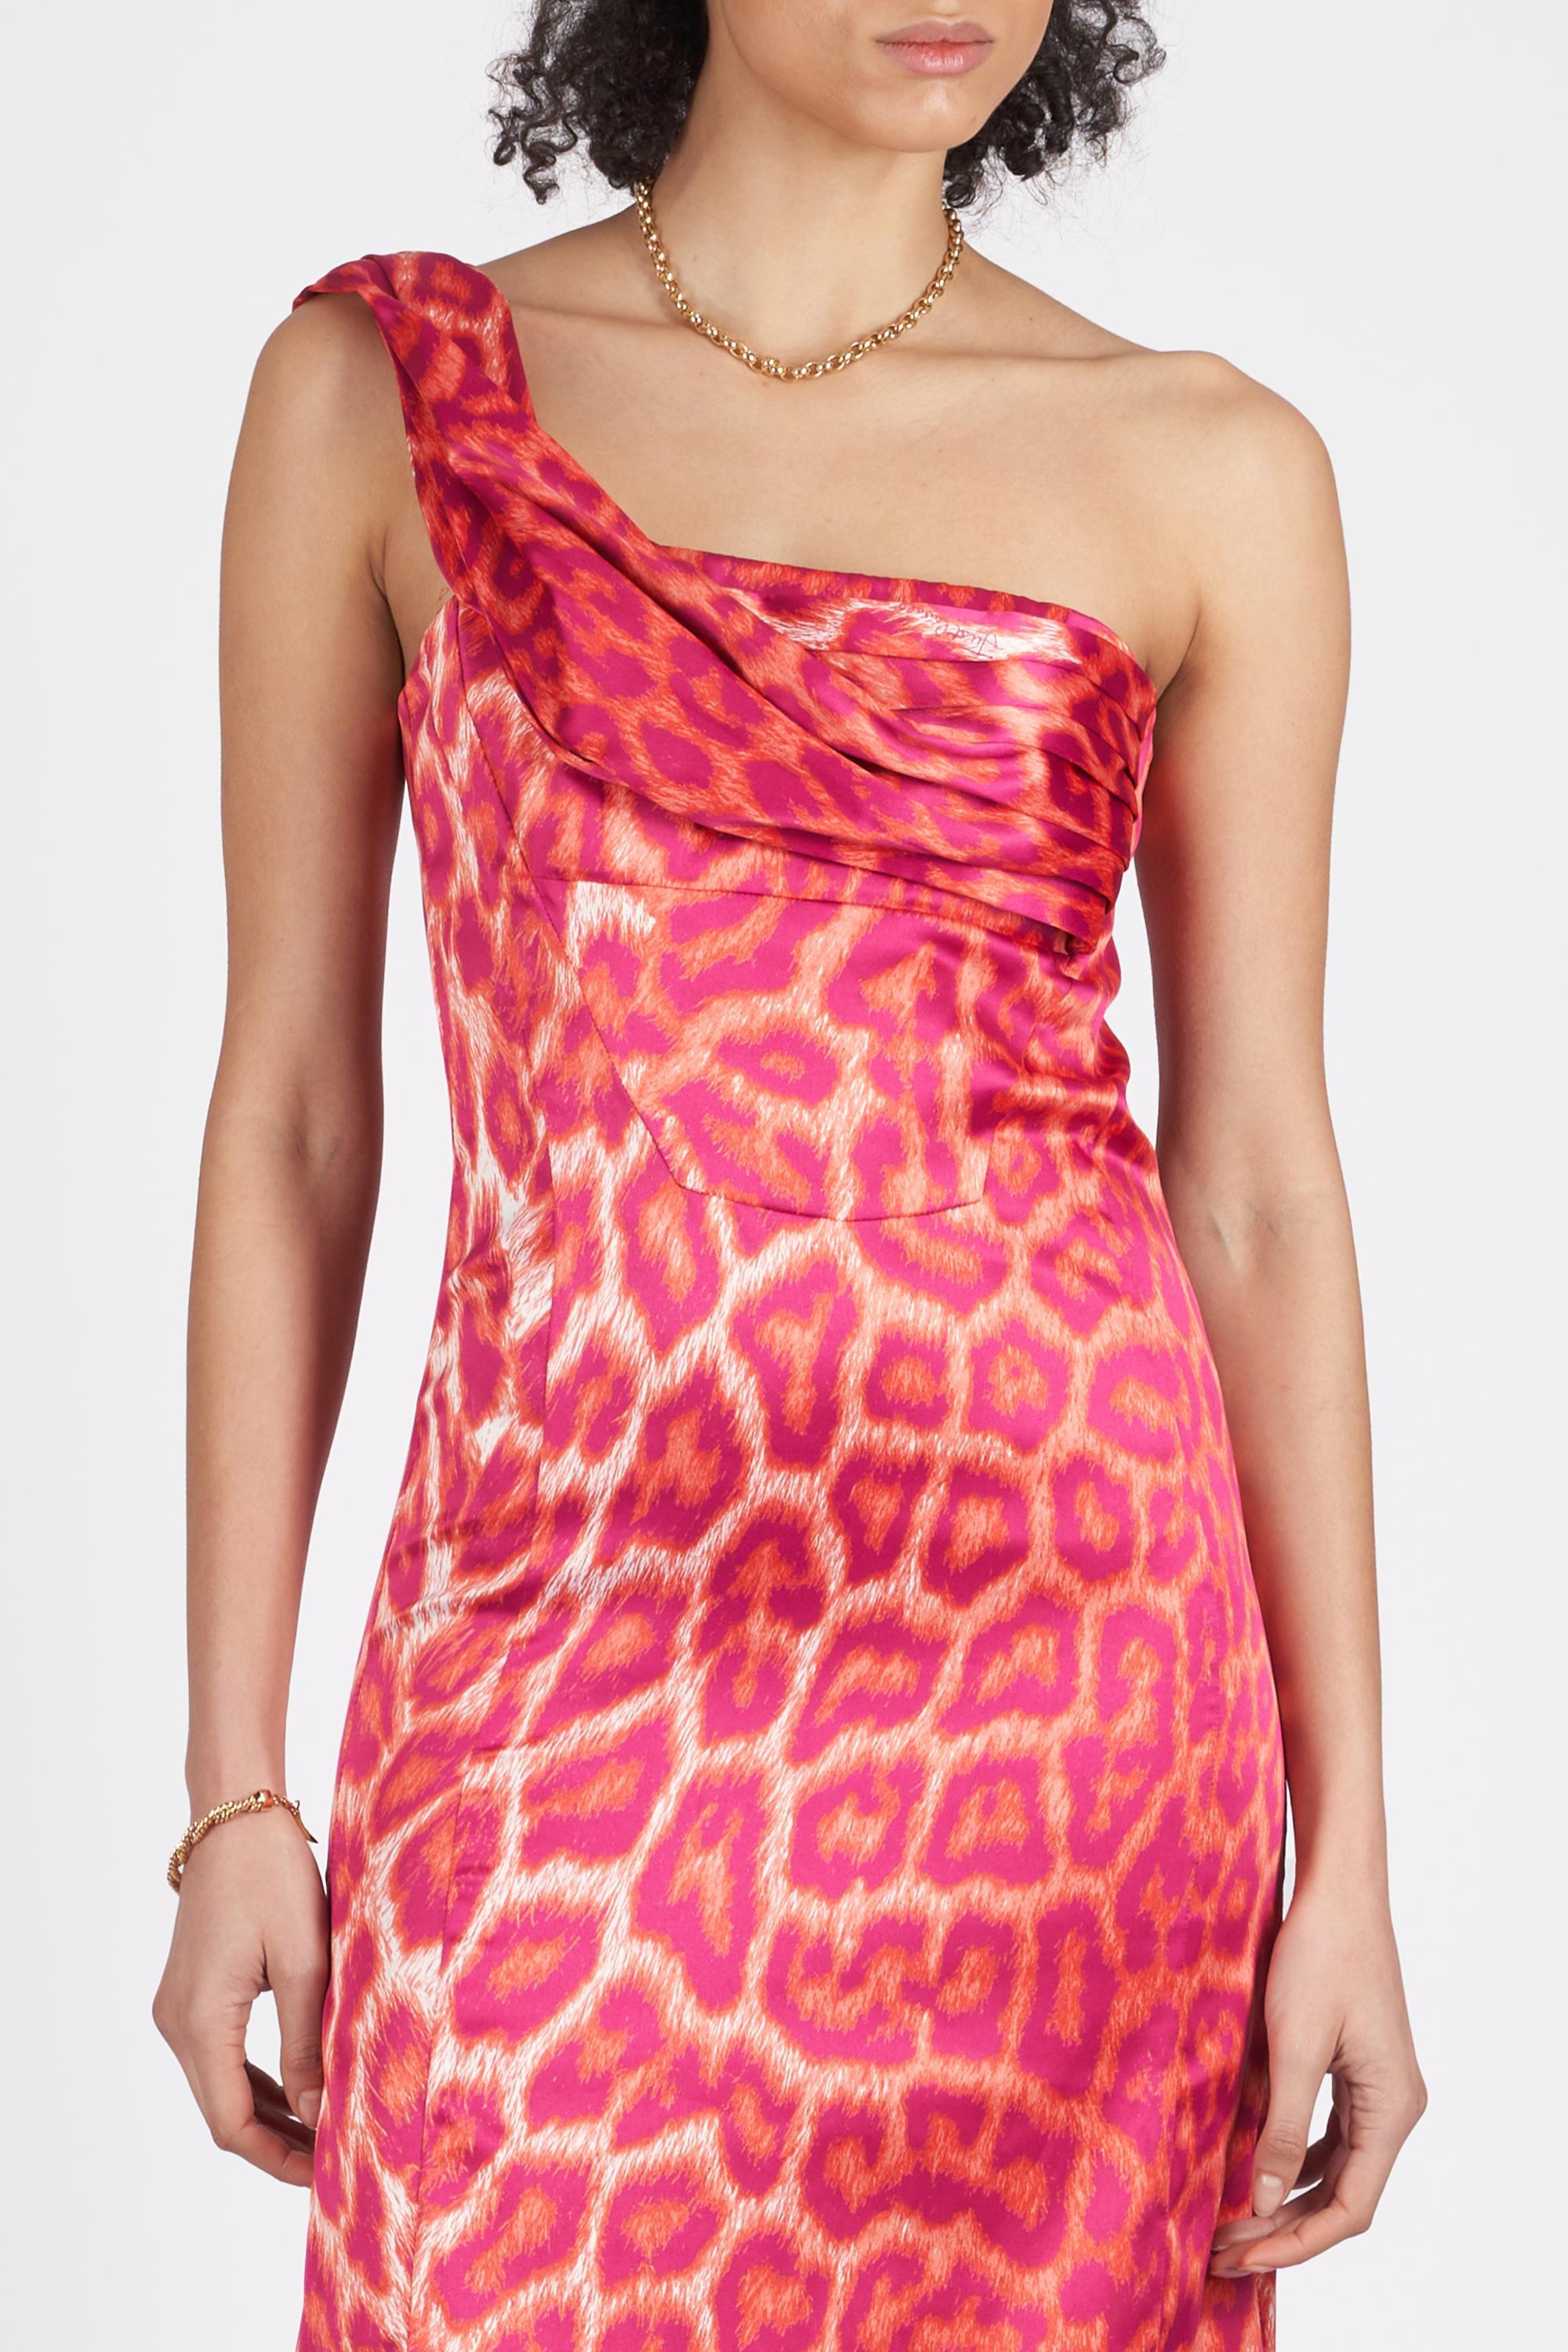 We are excited to present this Just Cavalli Spring Summer 2008 pink leopard print one shoulder sleeve dress. Features one shoulder strap with pleated chest detail and knee length. In excellent vintage condition.
Authenticity guaranteed.

Label size: